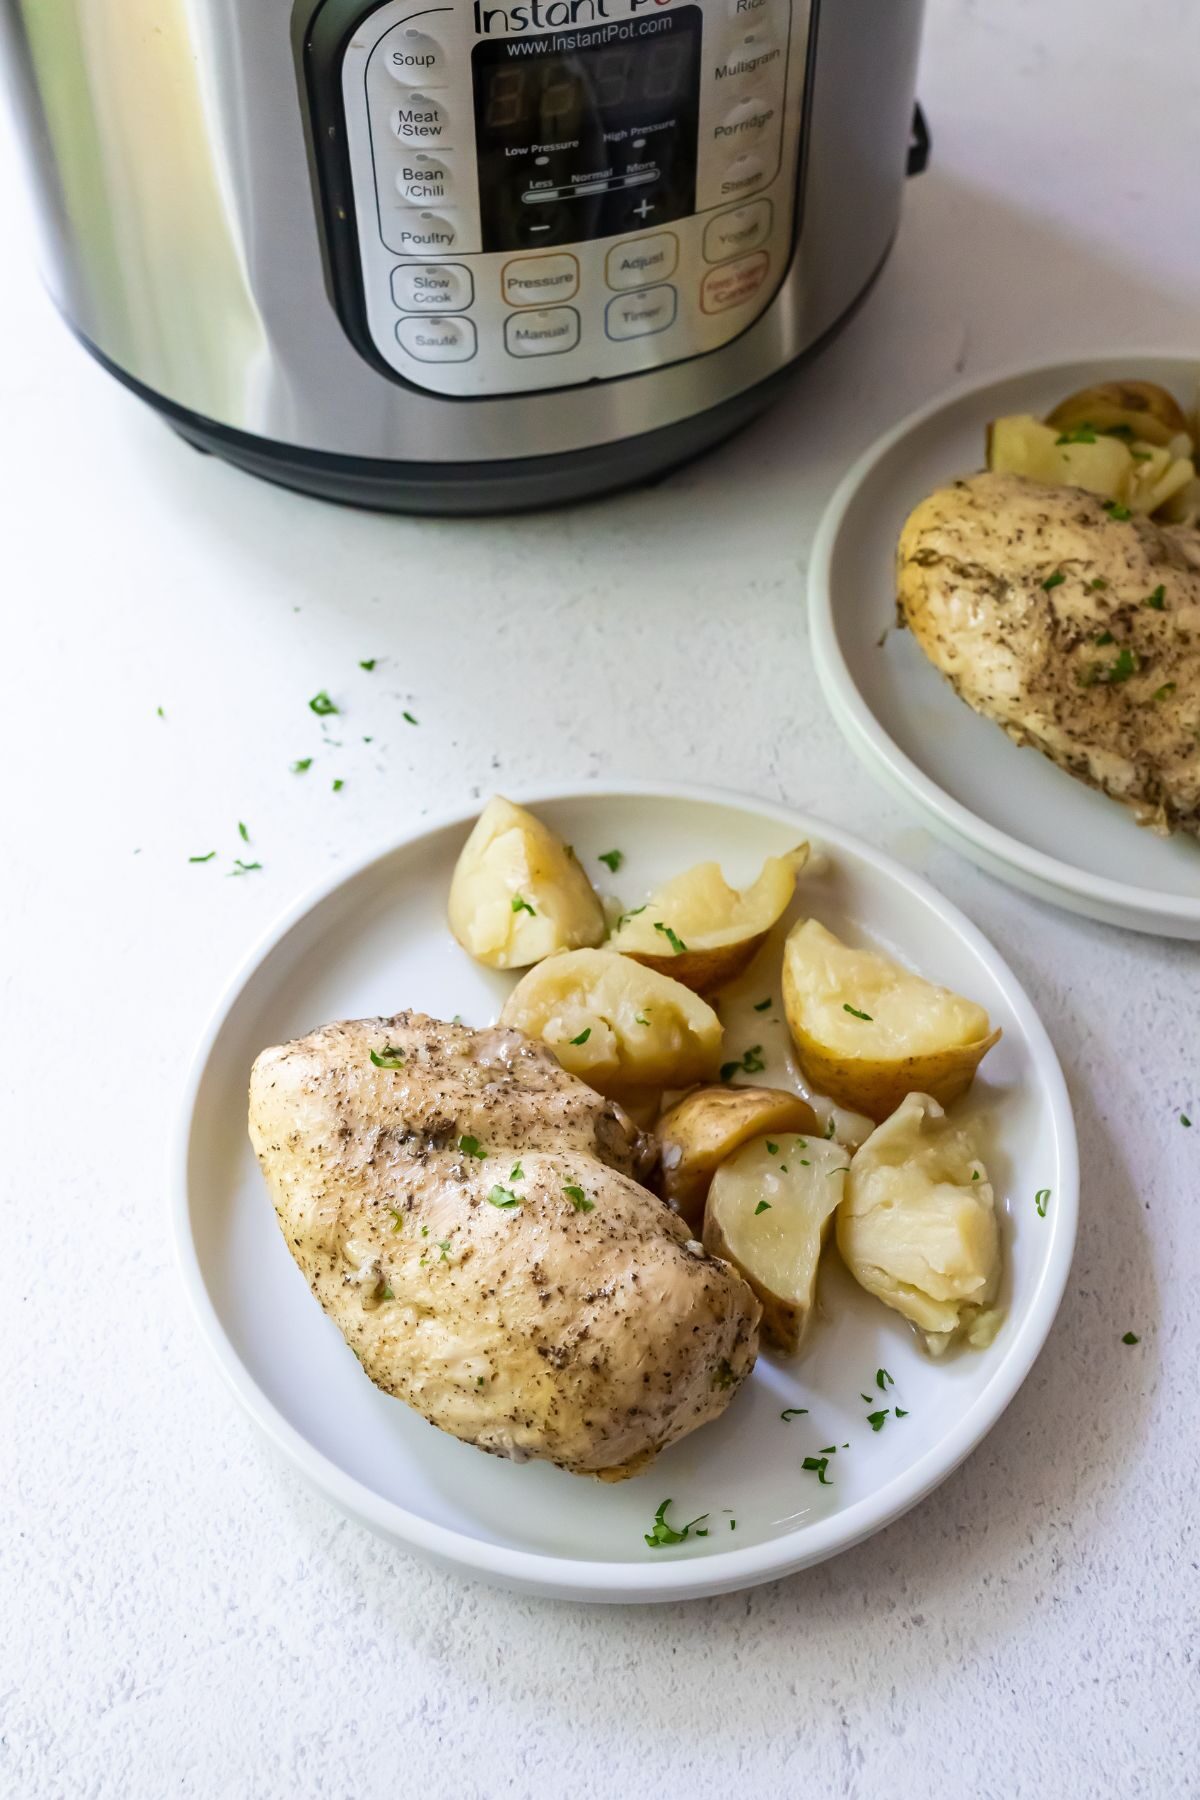 Cooked and seasoned chicken breast with quartered potatoes on a white plate with an instant pot in the background.